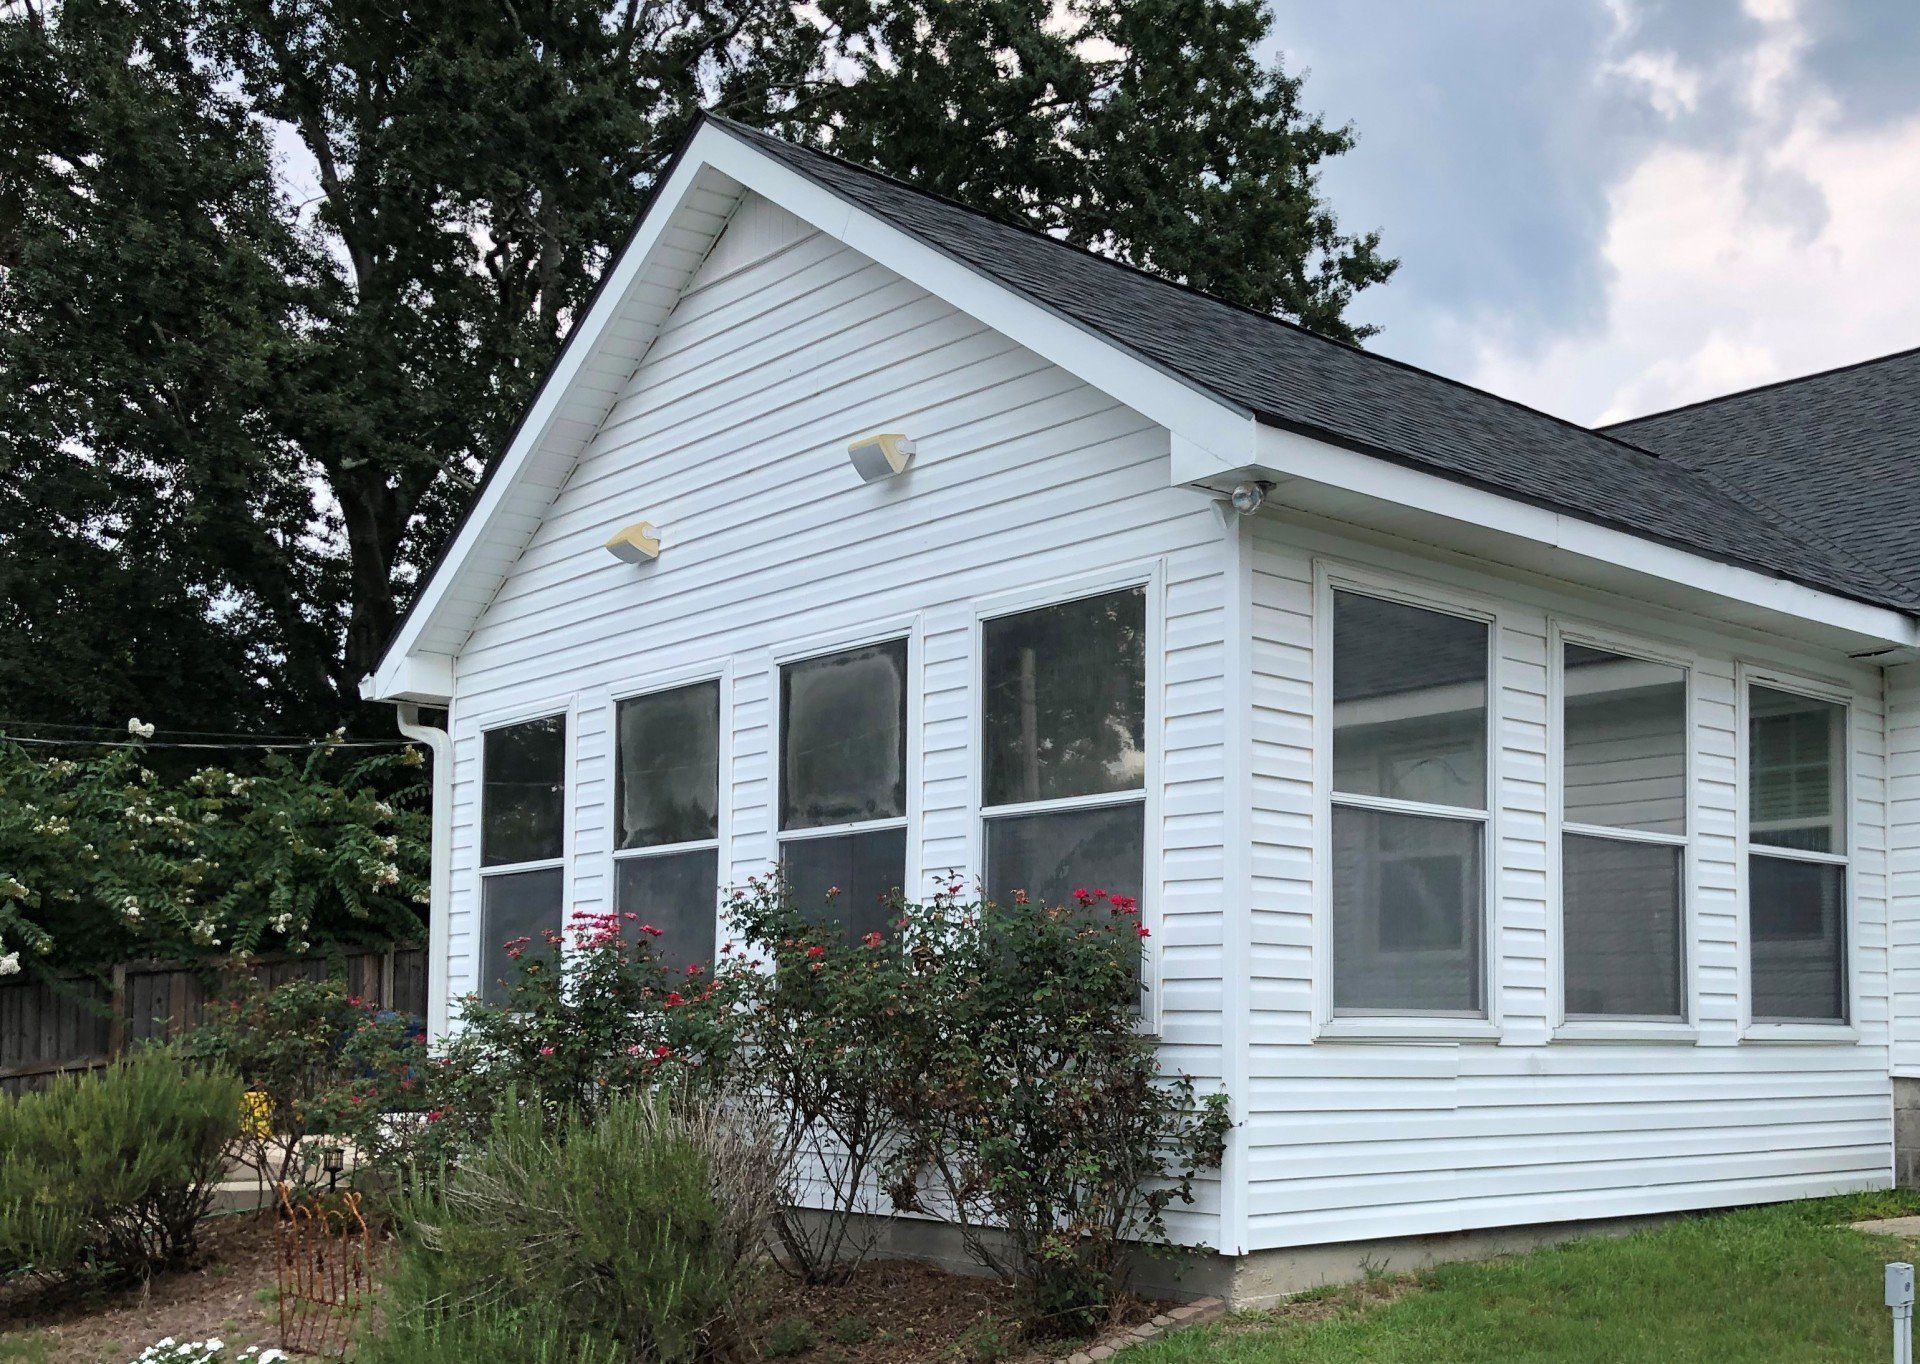 Professional residential tinting service - home windows tinted in Troy, Alabama